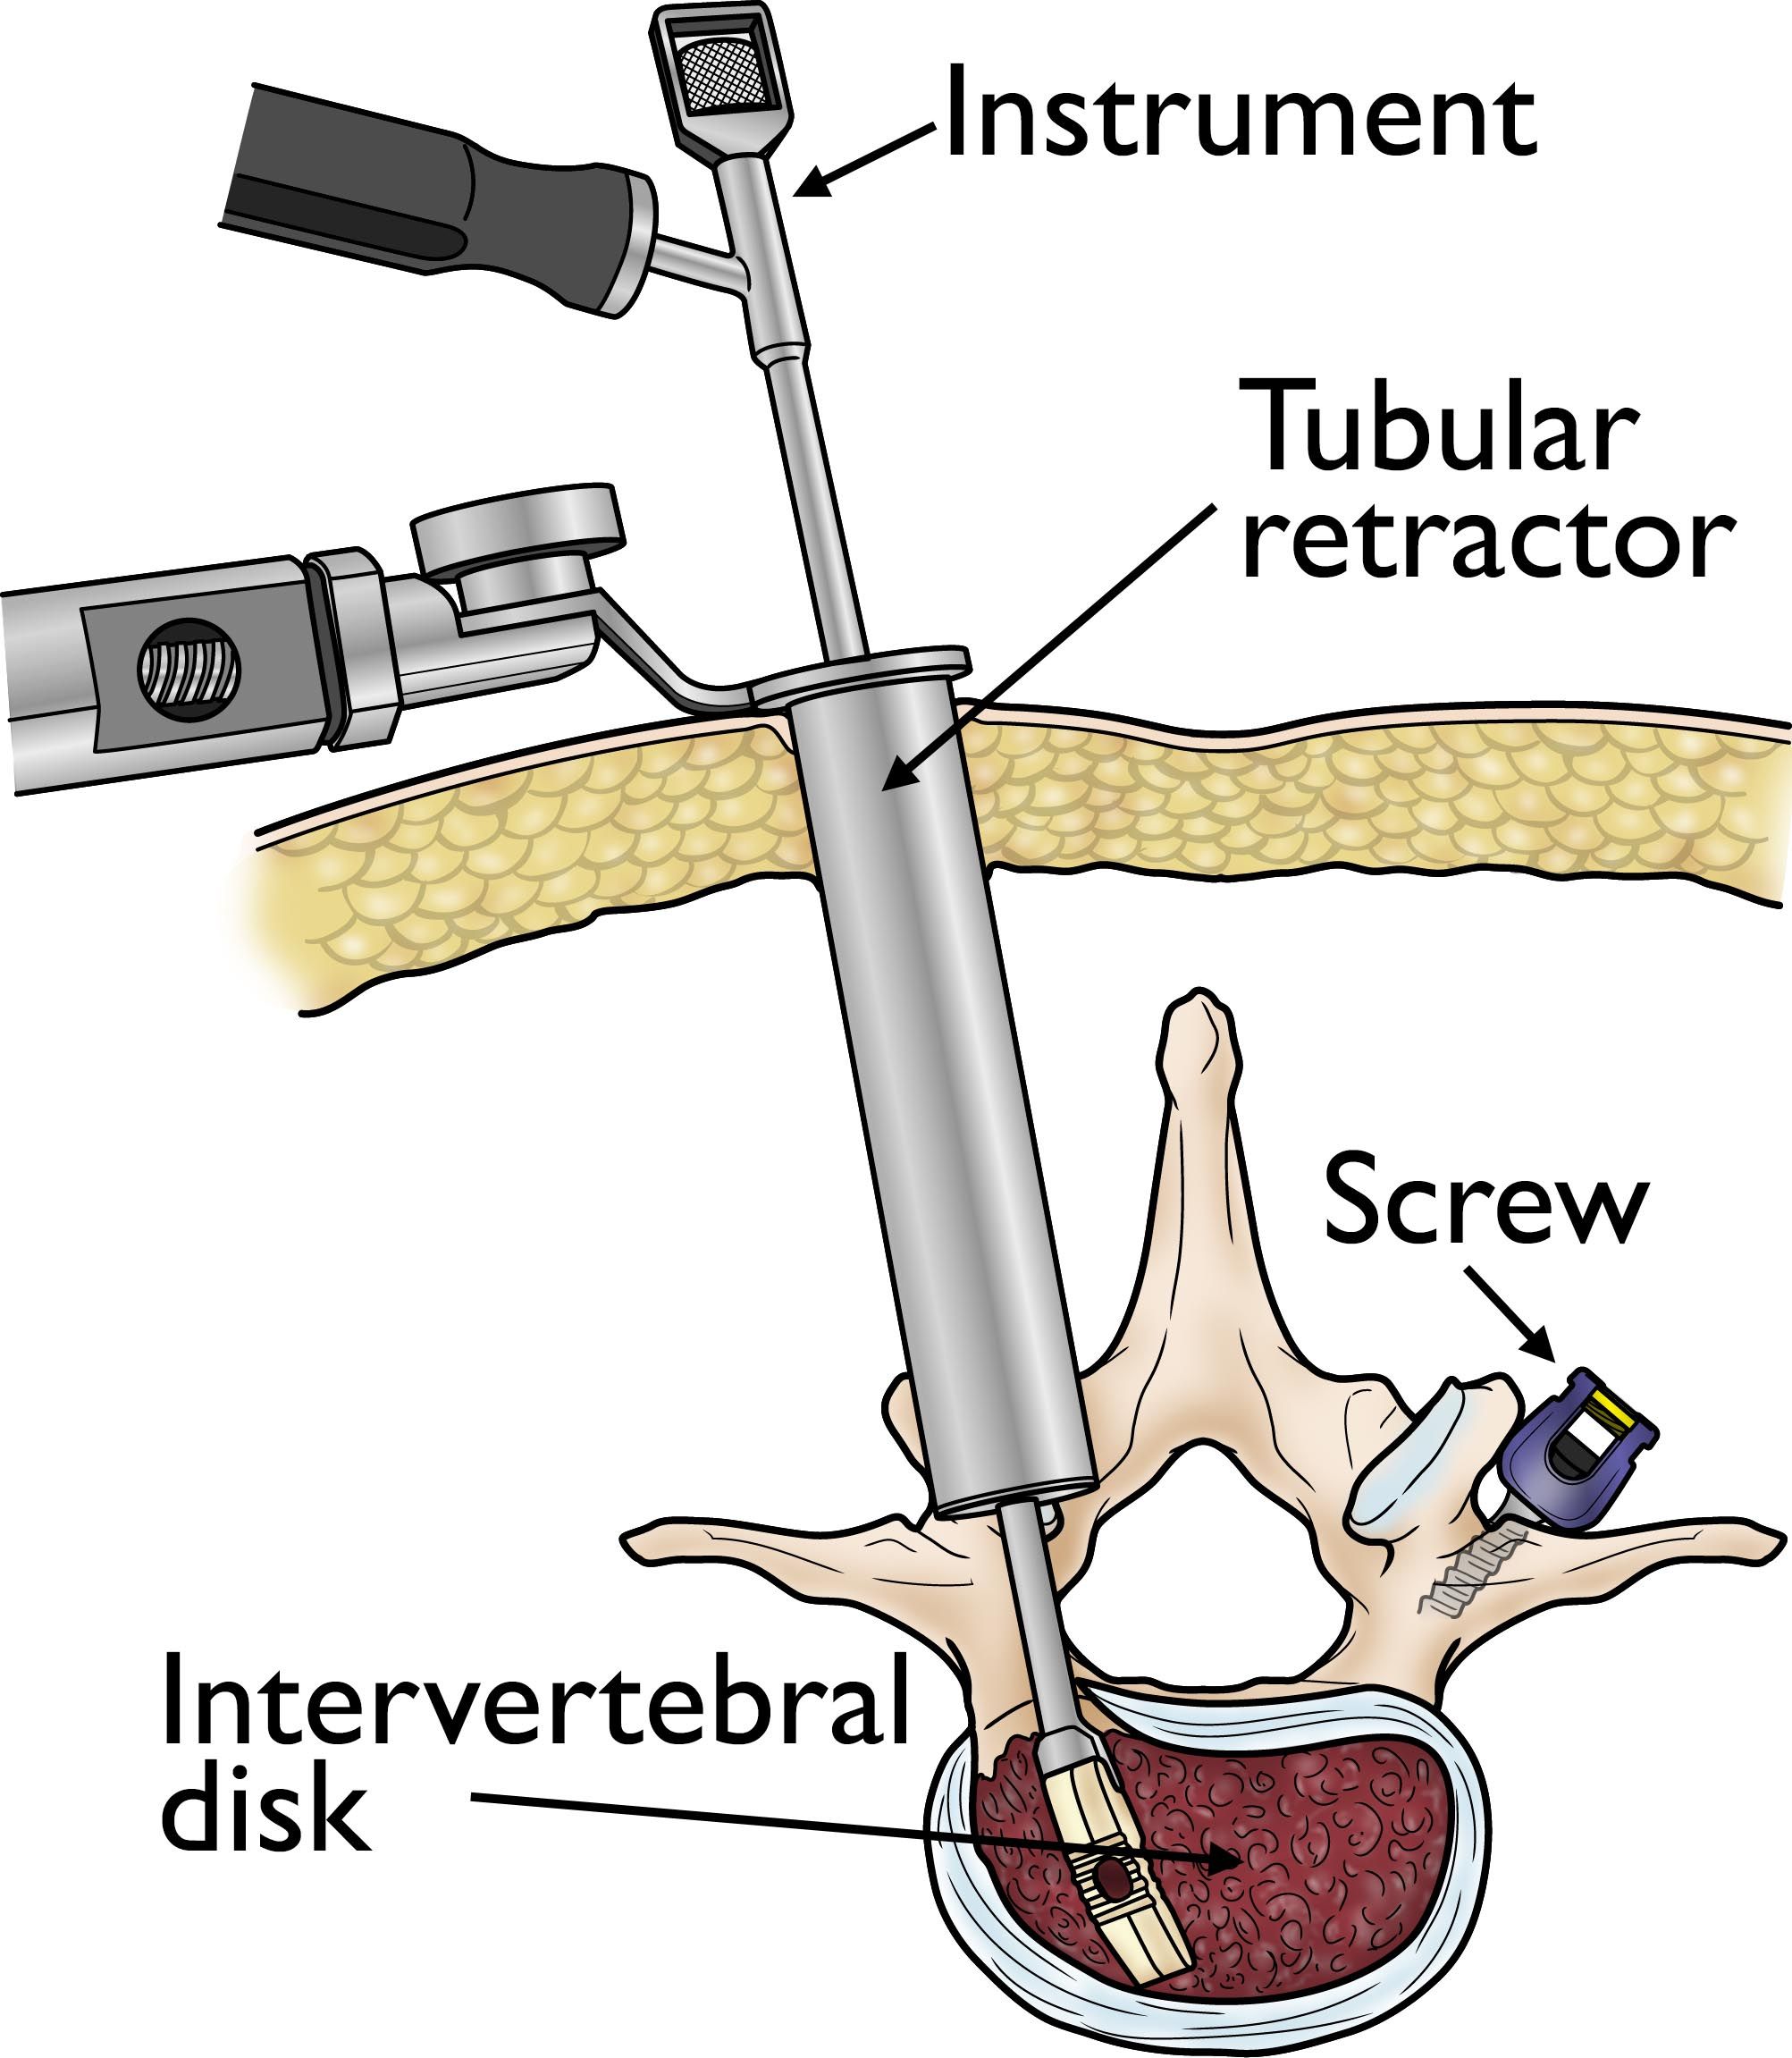 Tubular retractor used in a spine procedure